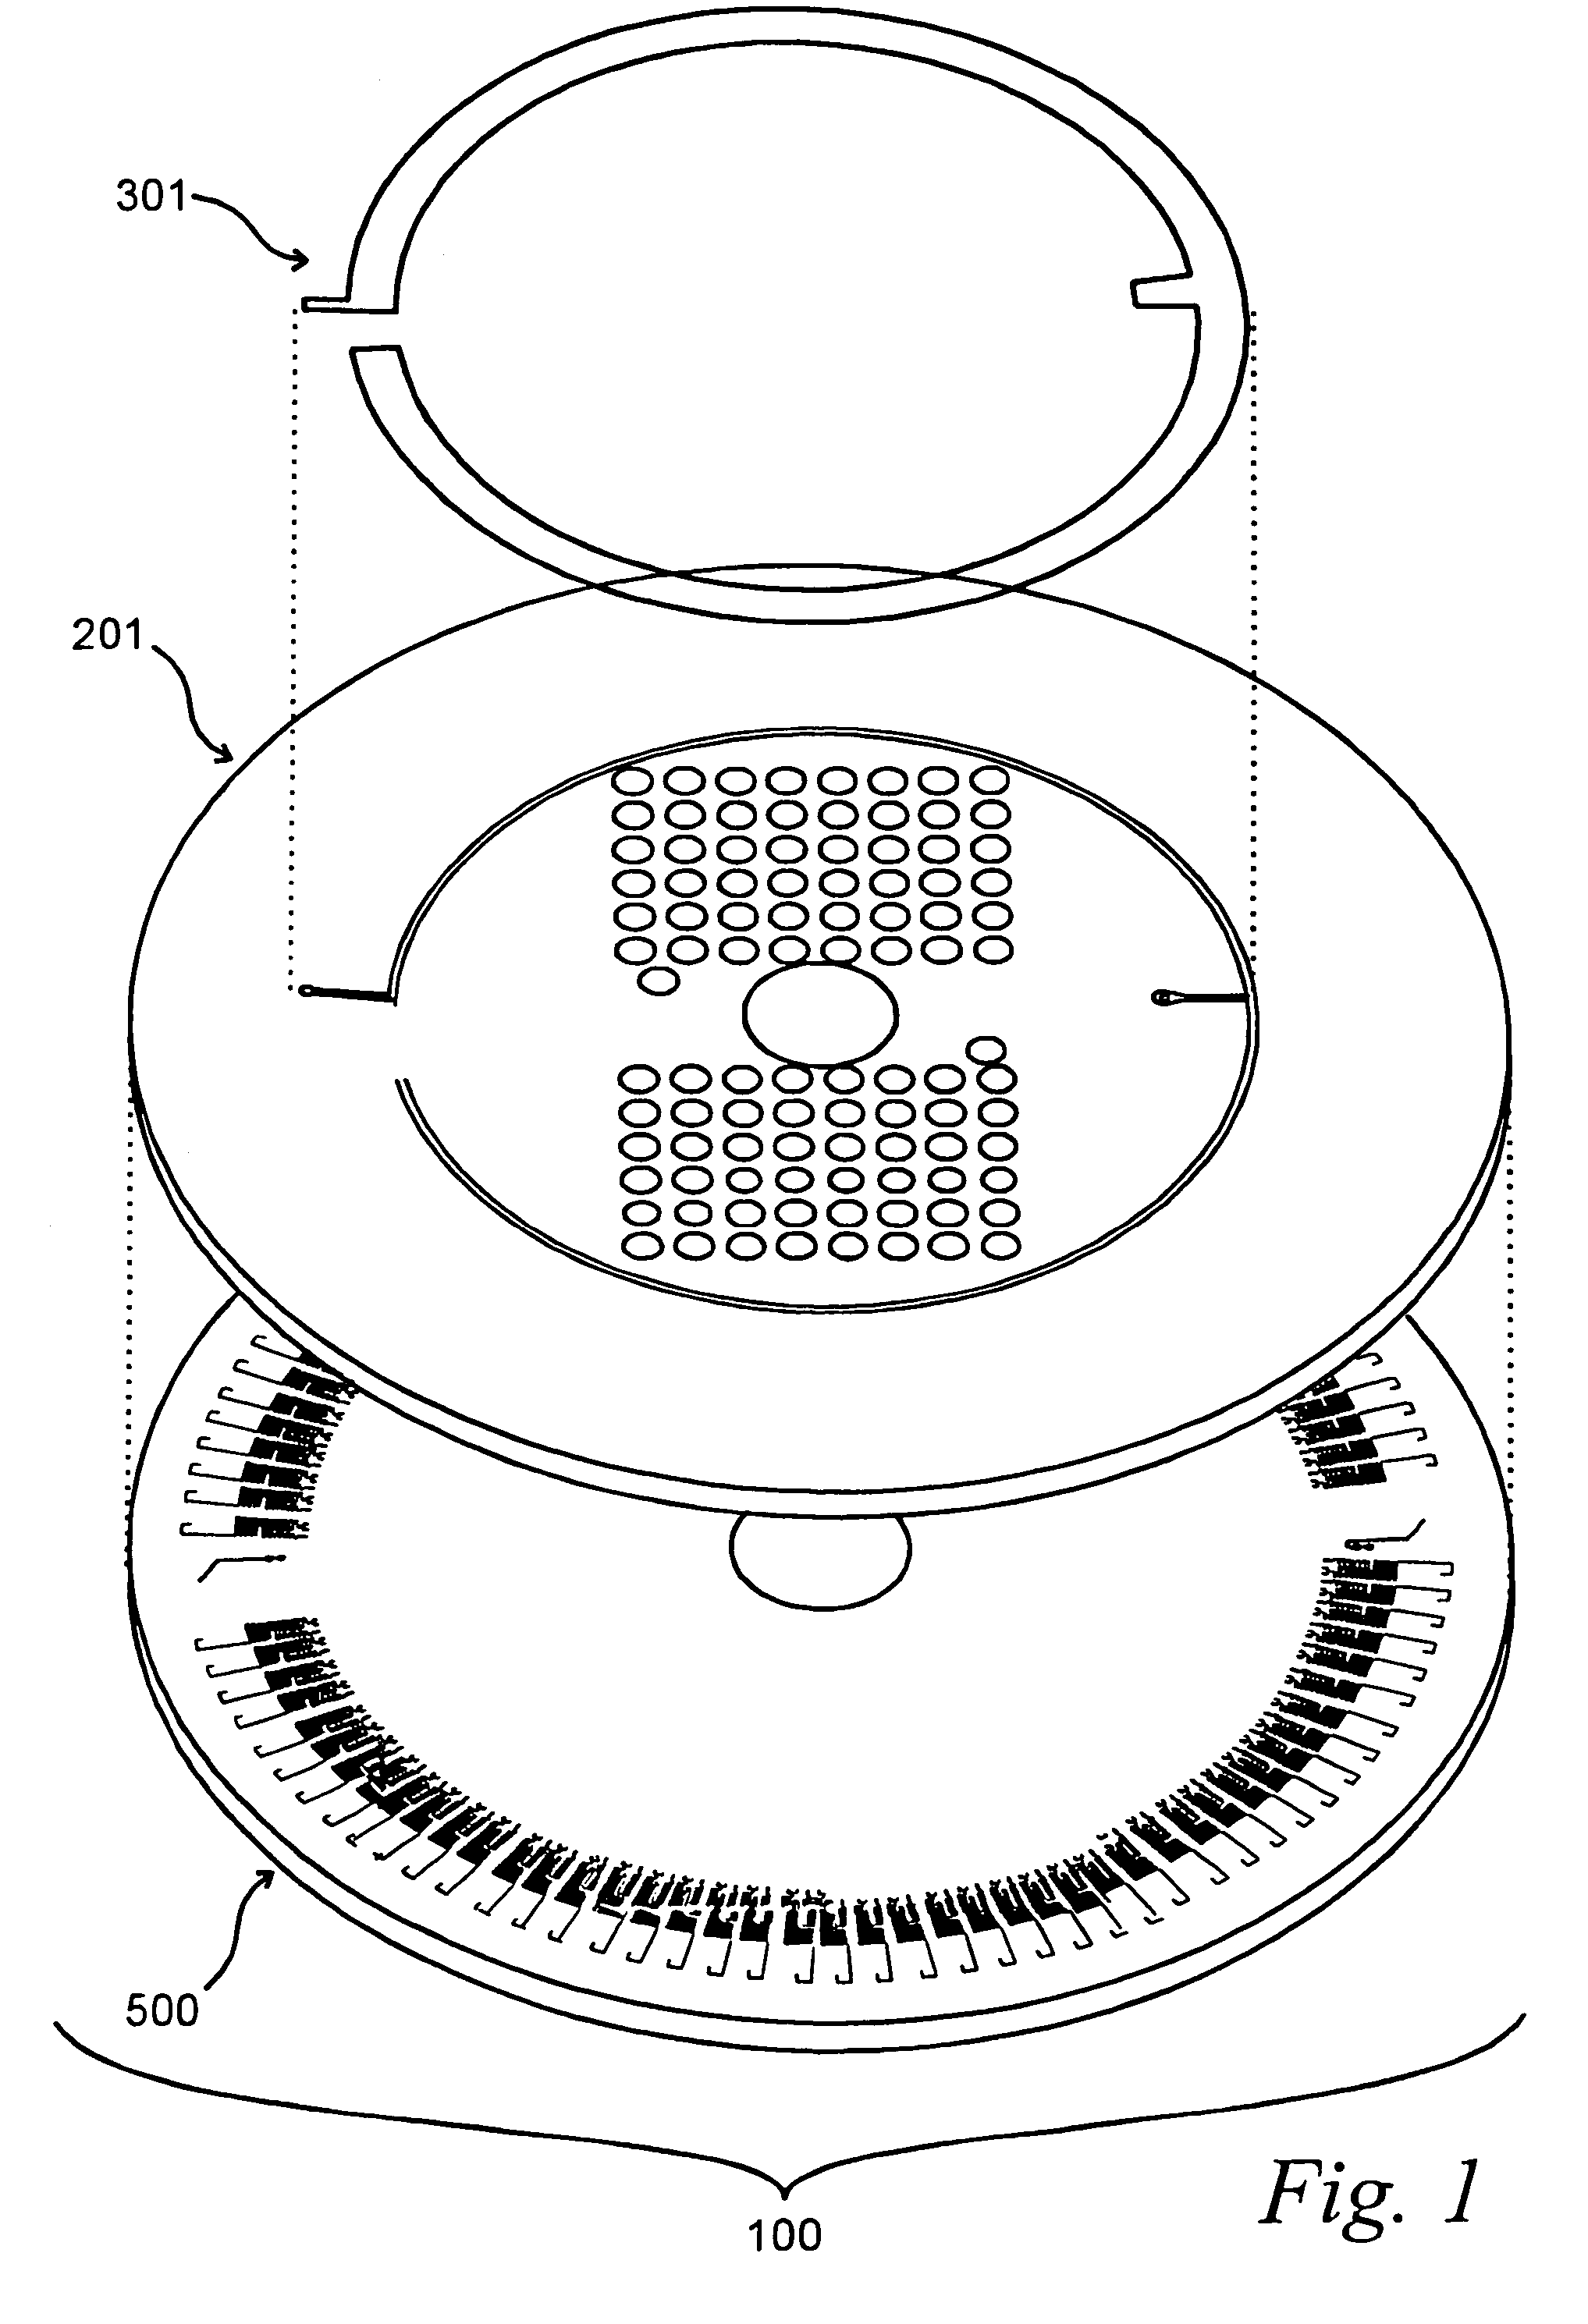 Microfluidics devices and methods of diluting samples and reagents